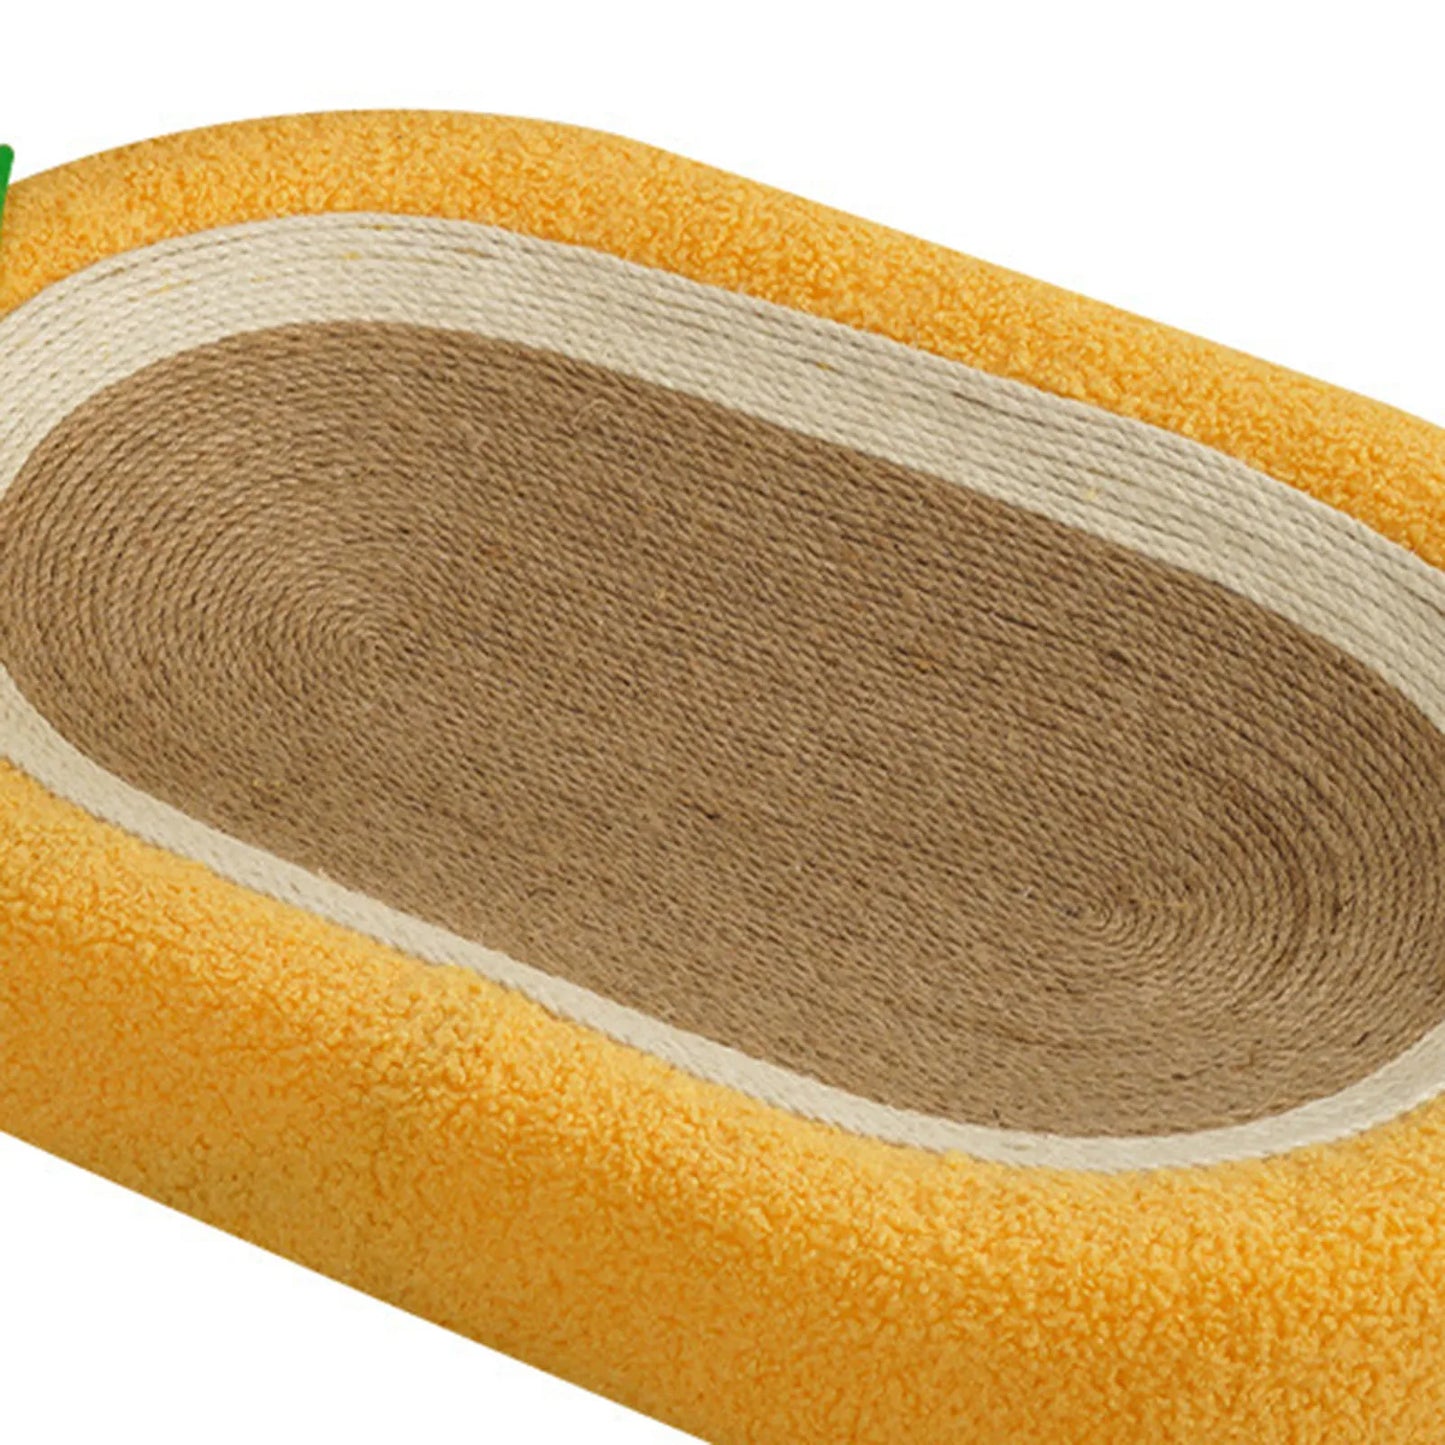 “Pineapple” Sisal scratching bed for cats